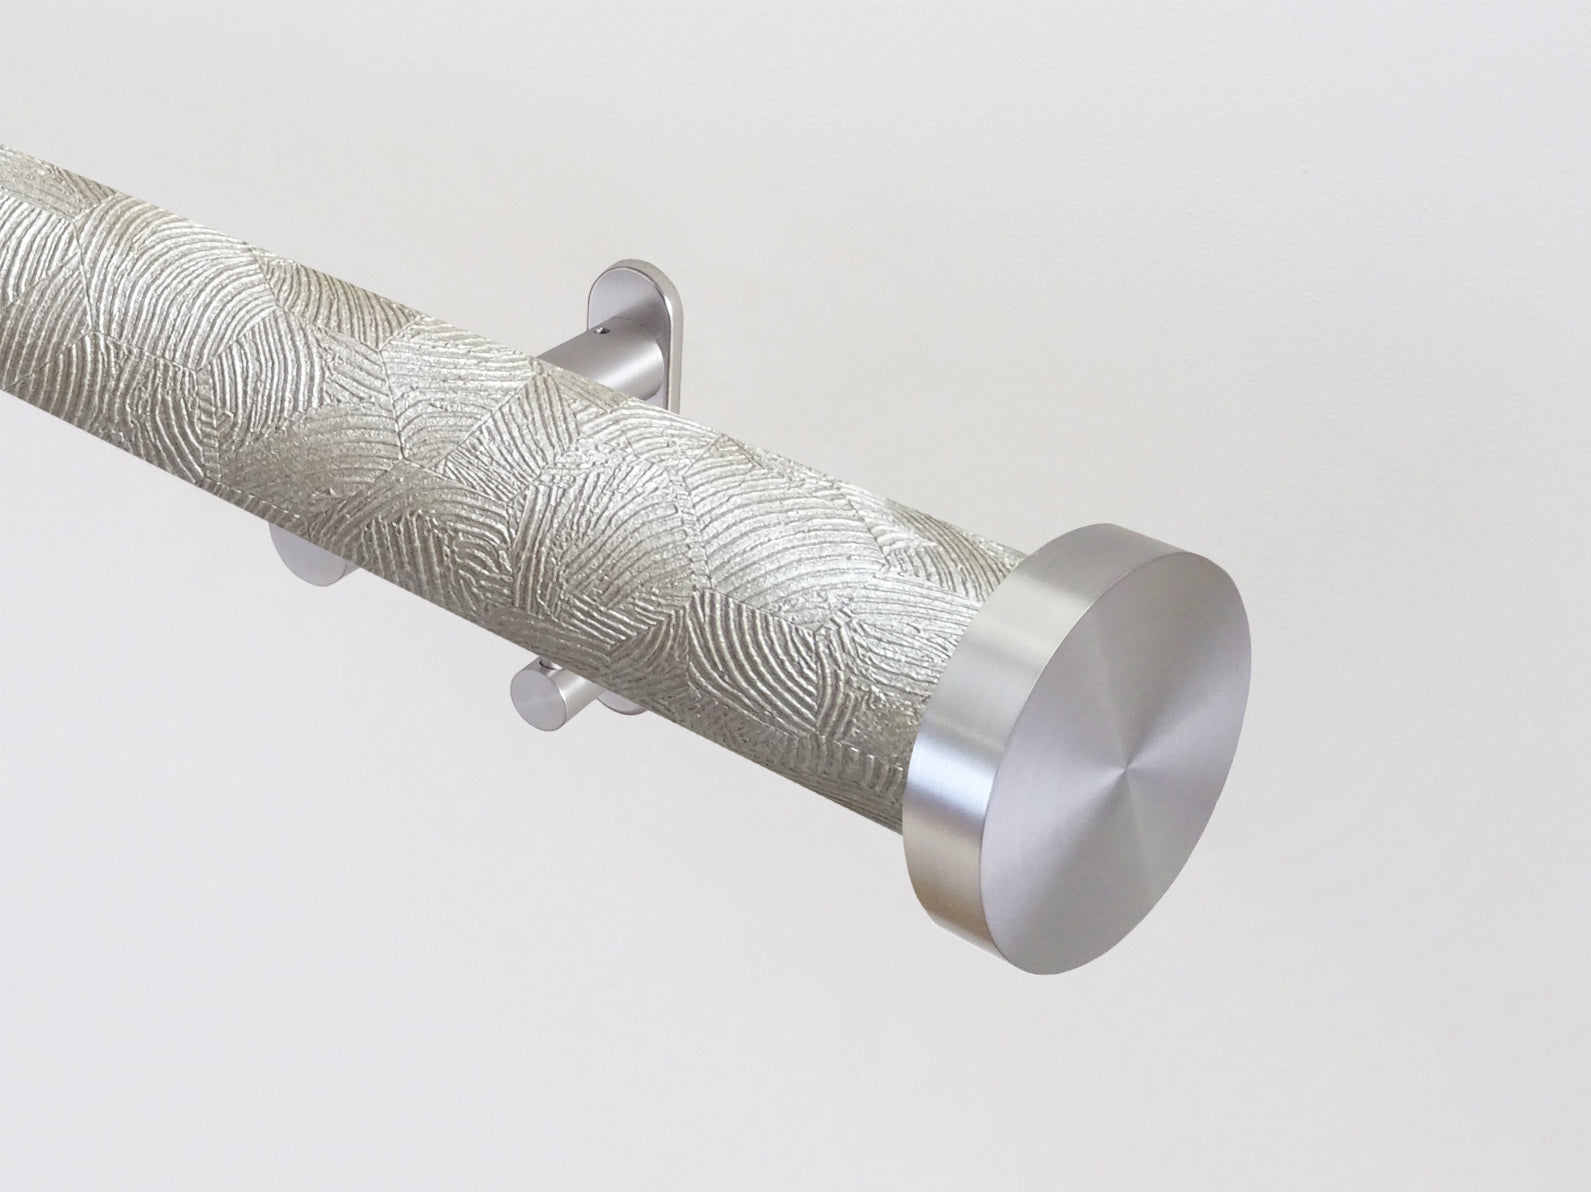 Tracked curtain pole set in sandstone | Walcot House